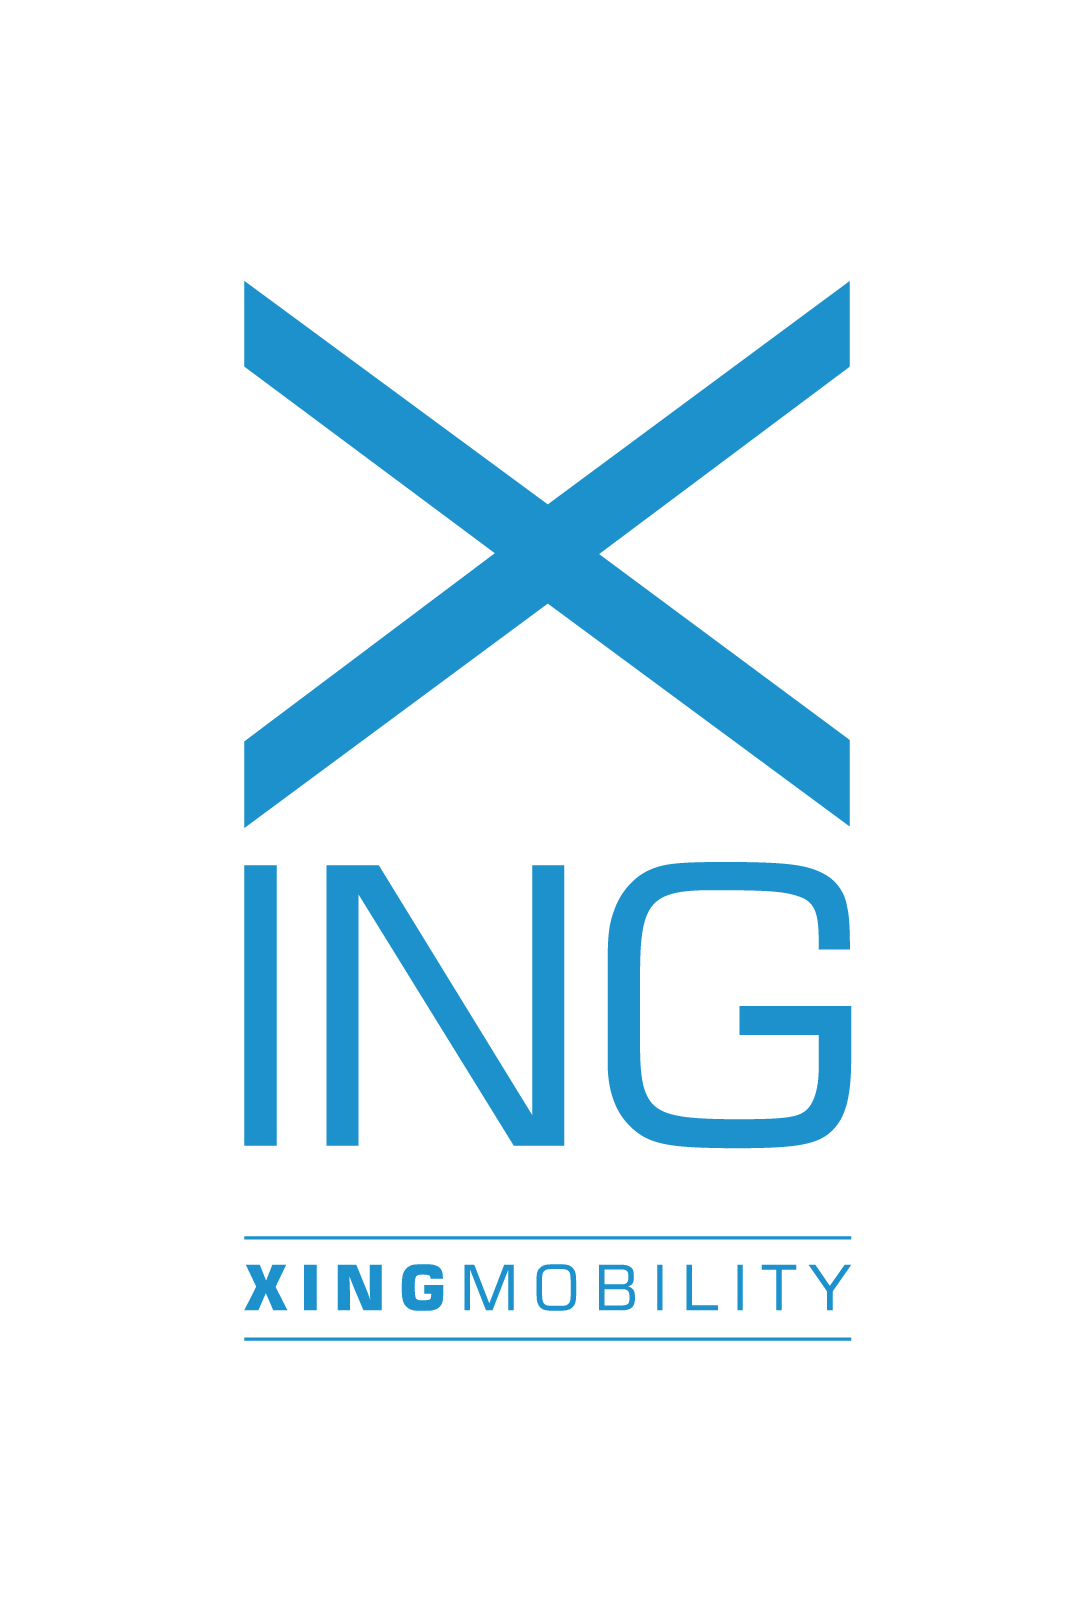 Profile image for XING Mobility Inc.